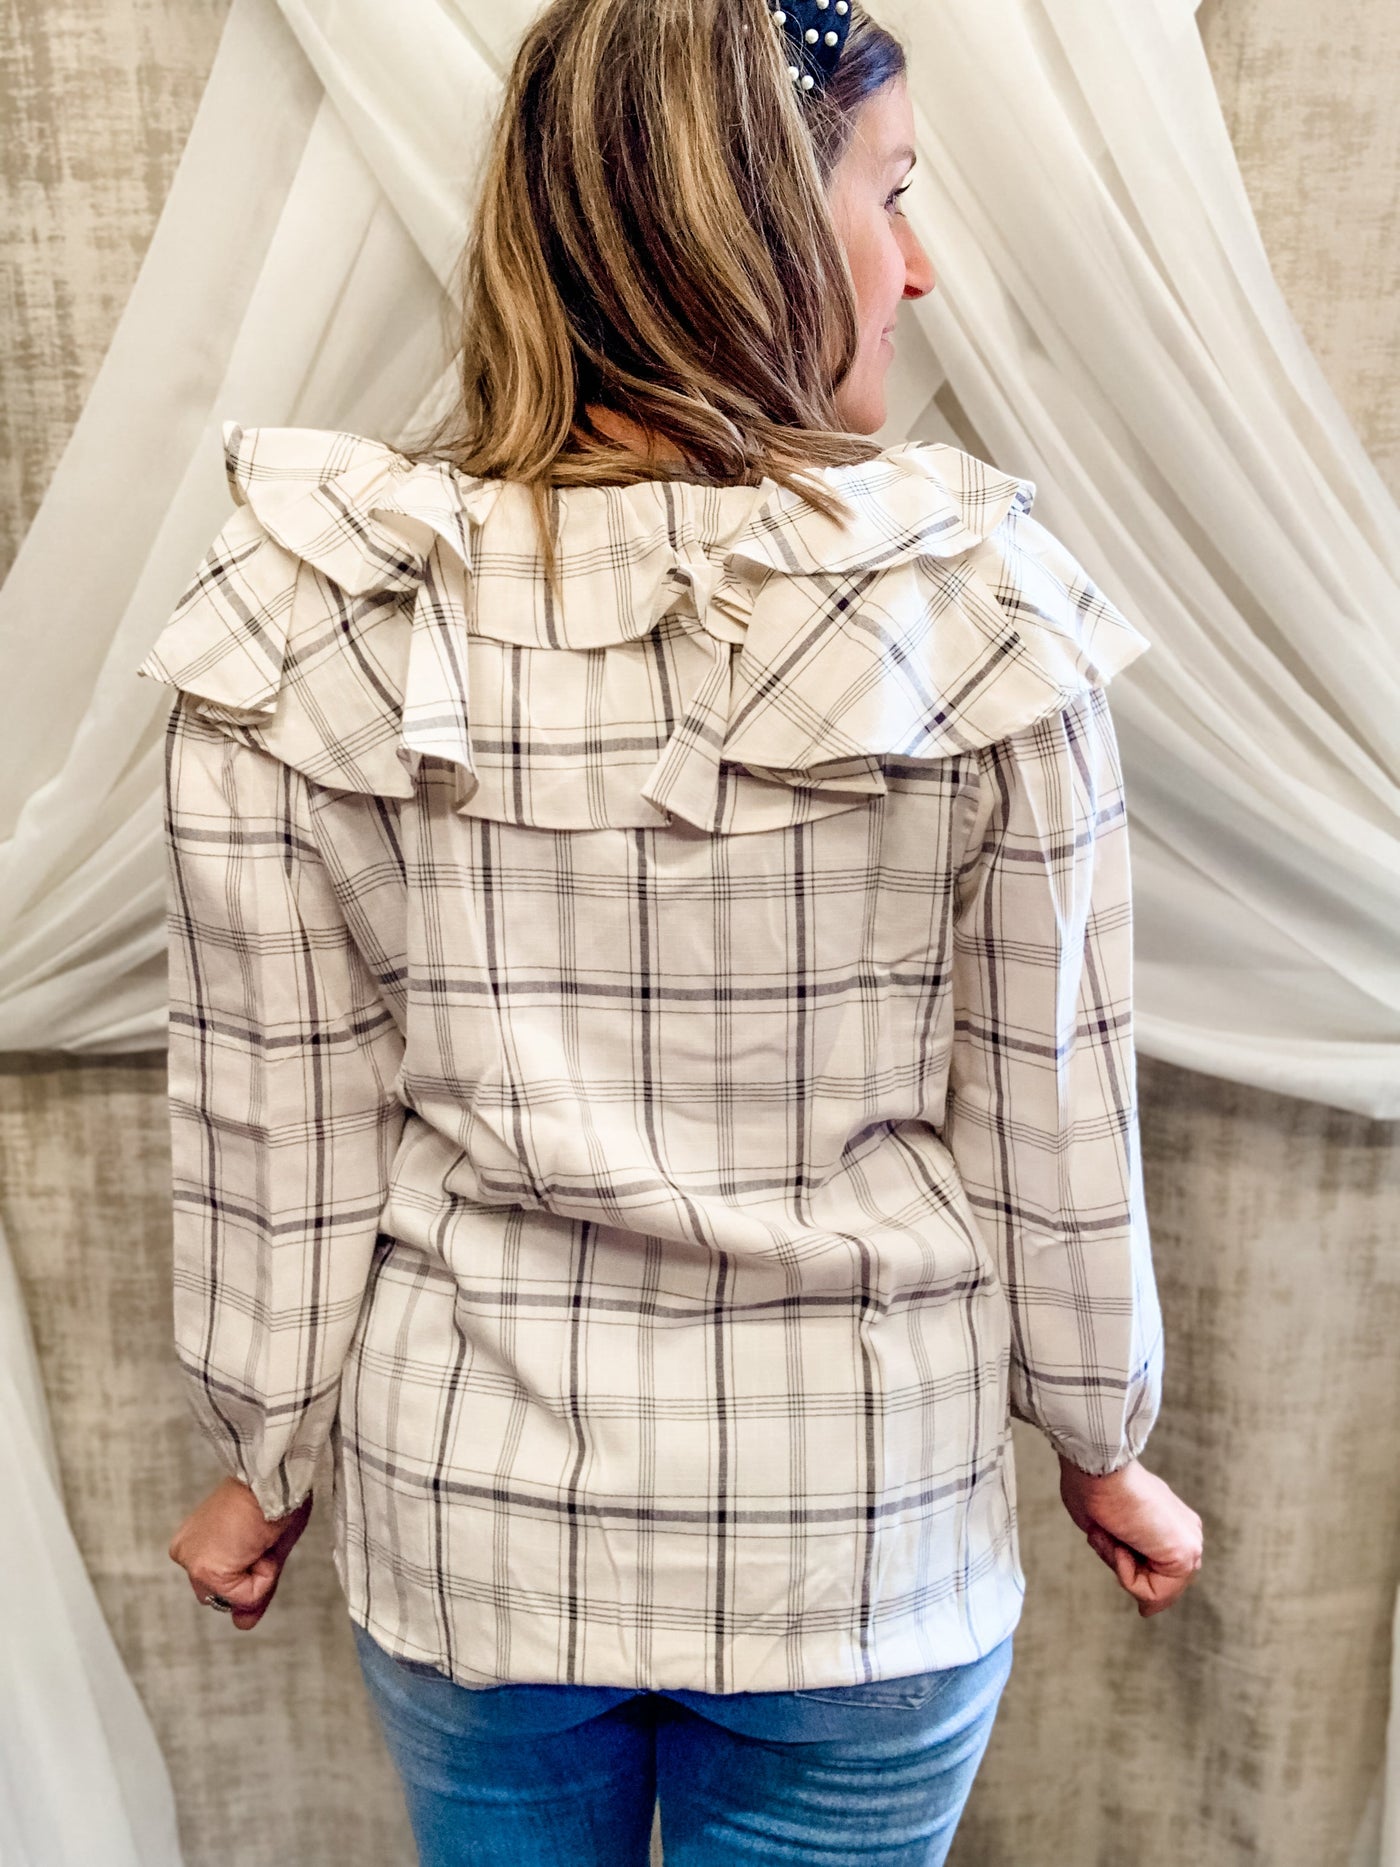 Ivory and Charcoal Plaid Top with Ruffle Detail